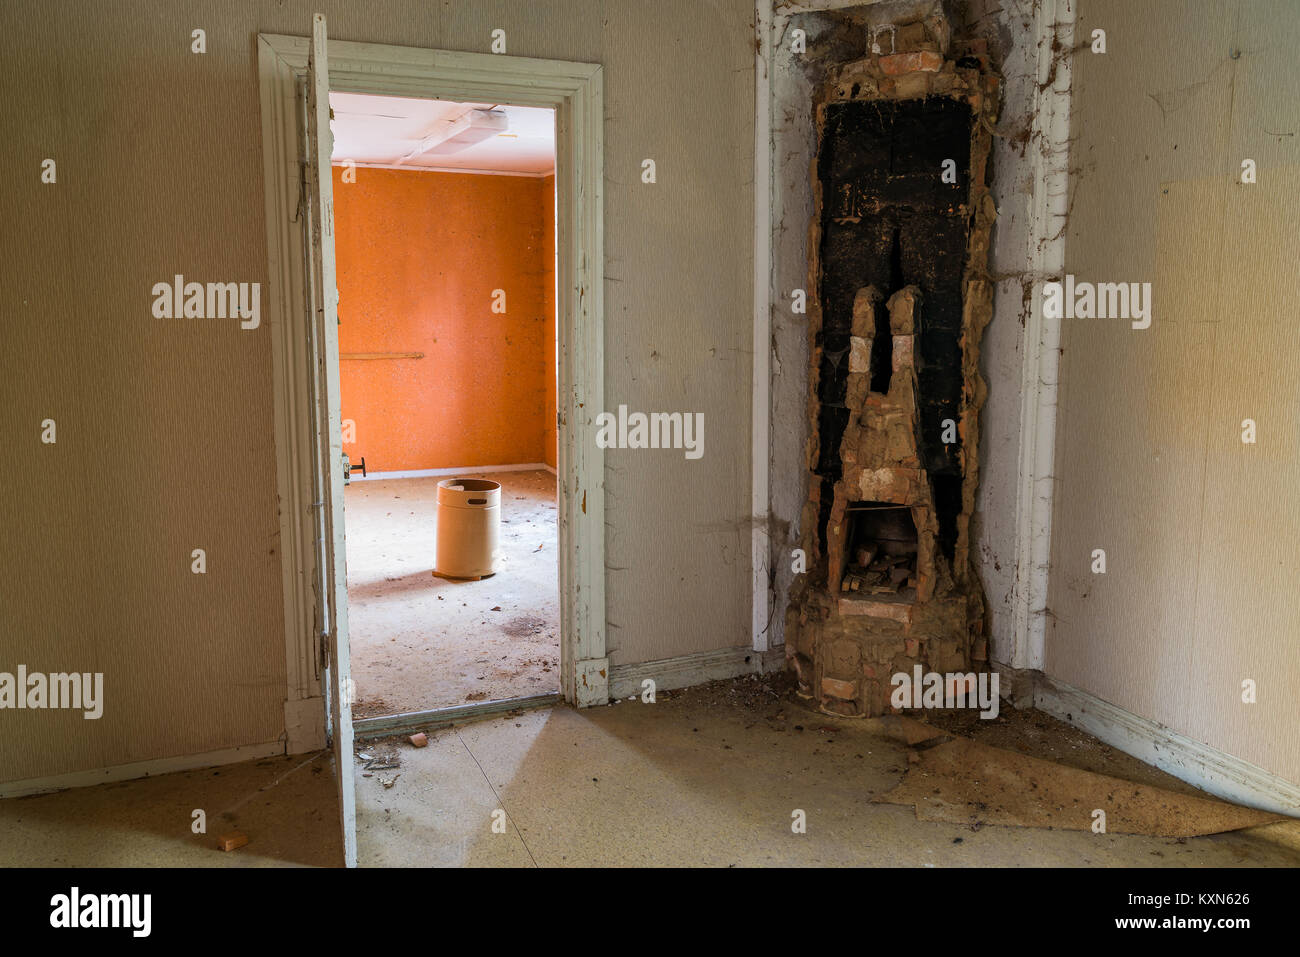 Dismantled tiled stove and open door inside a room in an abandoned house. Stock Photo